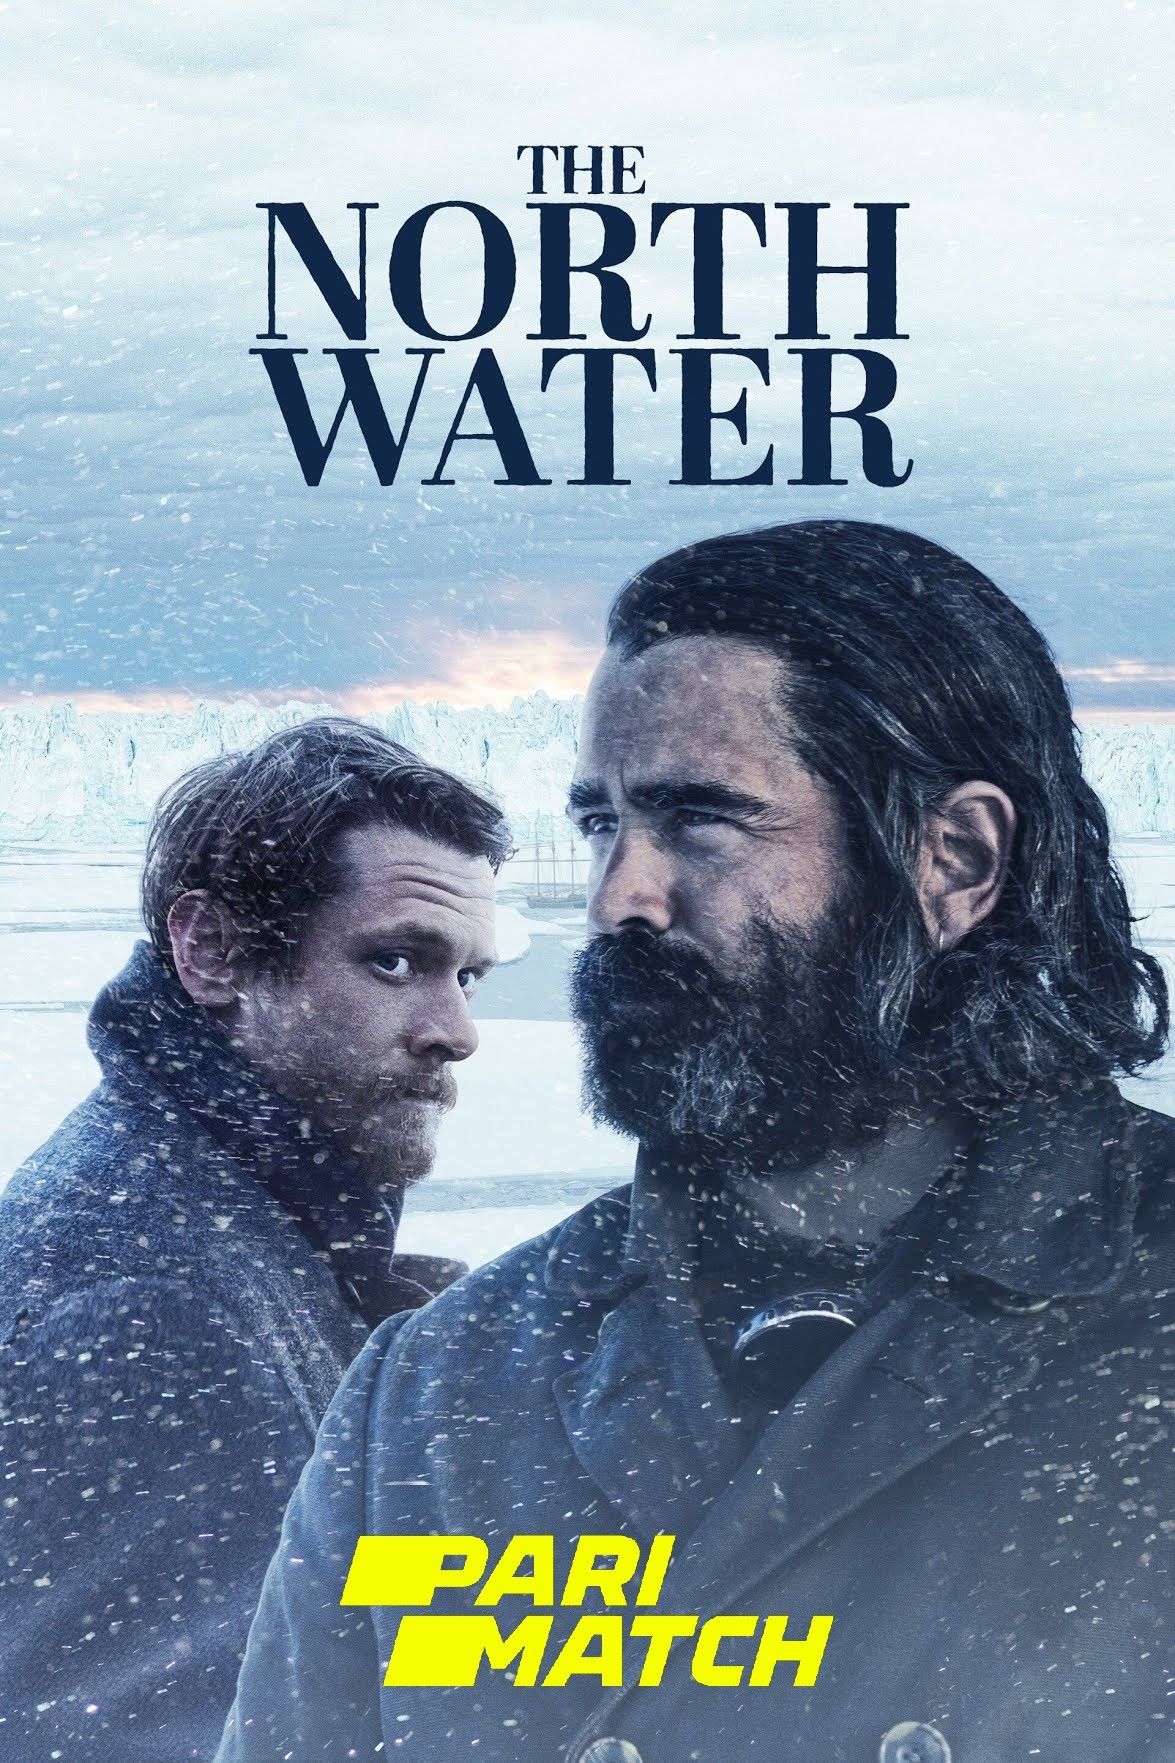 The North Water: Season 1 (2021) (Episode 4) Hindi (Voice Over) Dubbed TV Series download full movie